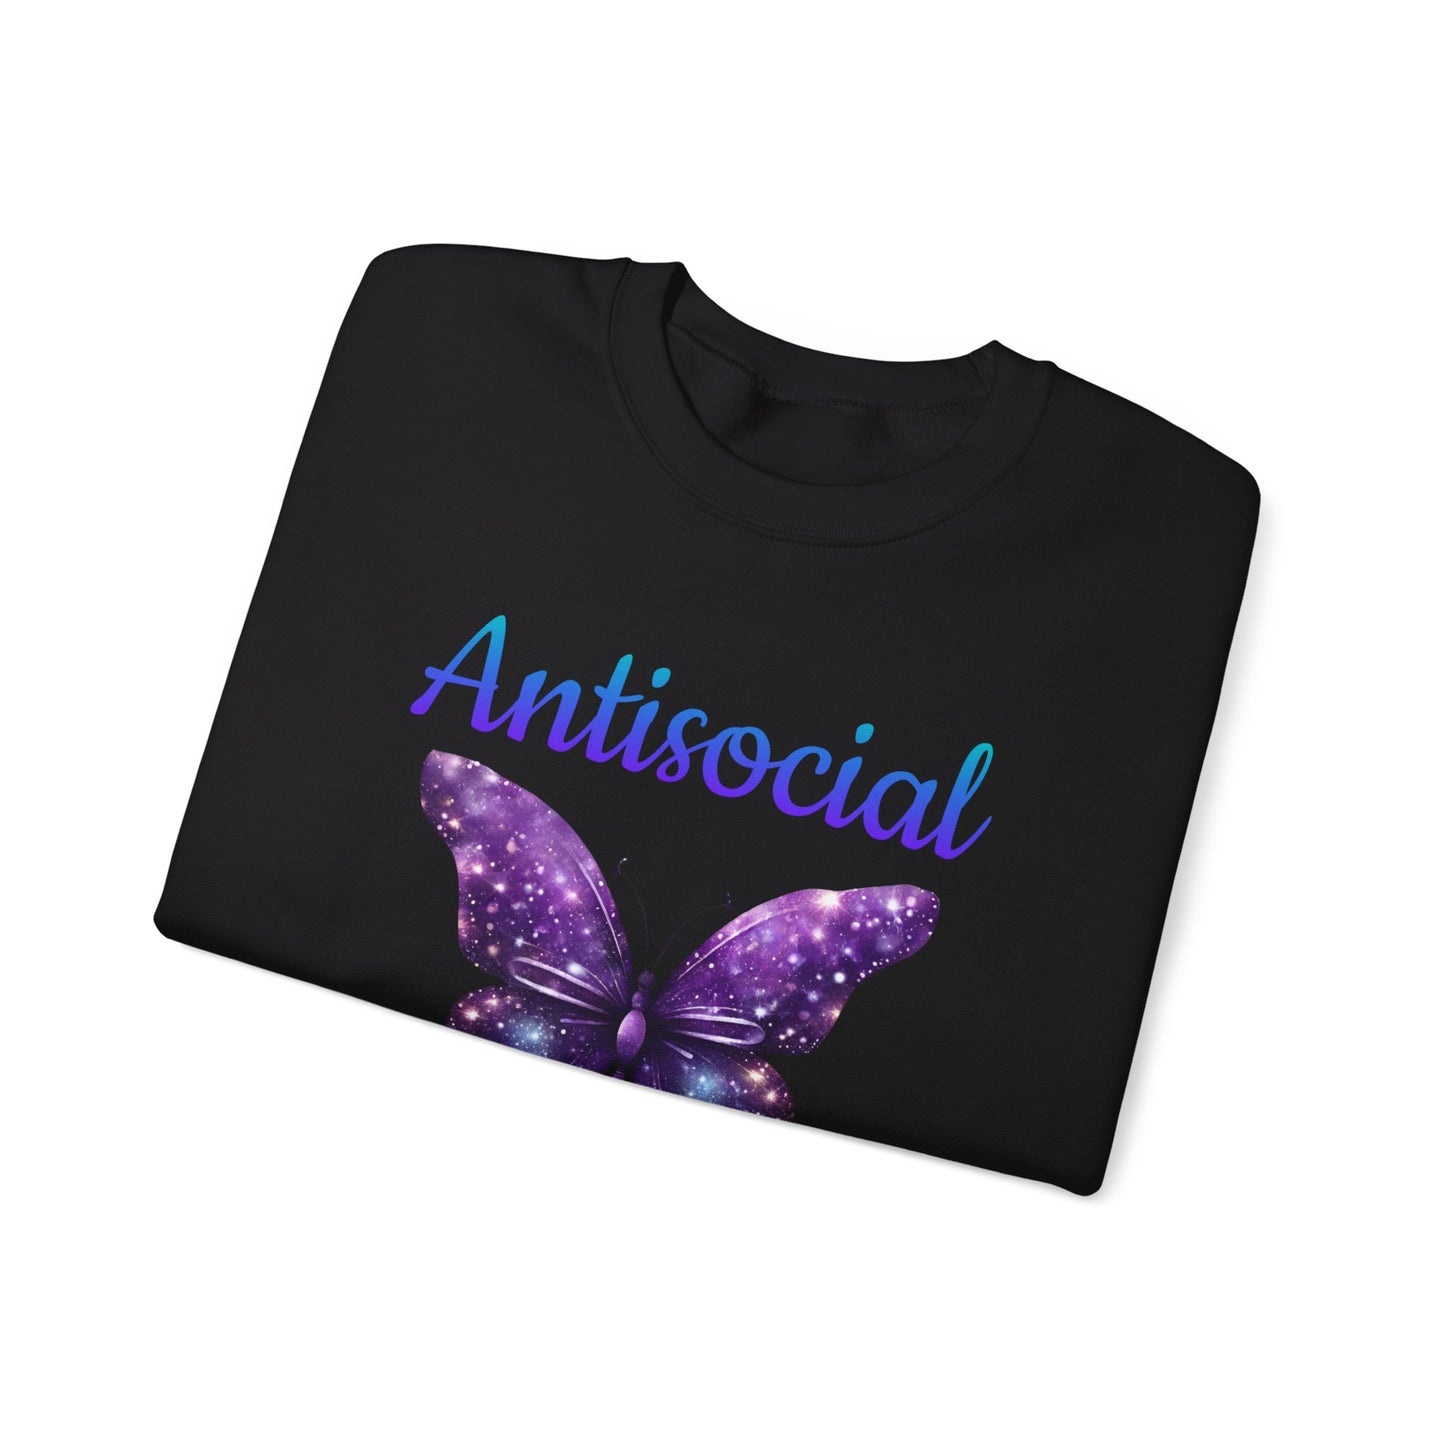 Antisocial Butterfly woman's graphic Sweatshirt, Butterfly mom shirt, introvert shirt, homebody sweatshirt, antisocial butterfly top, gifts